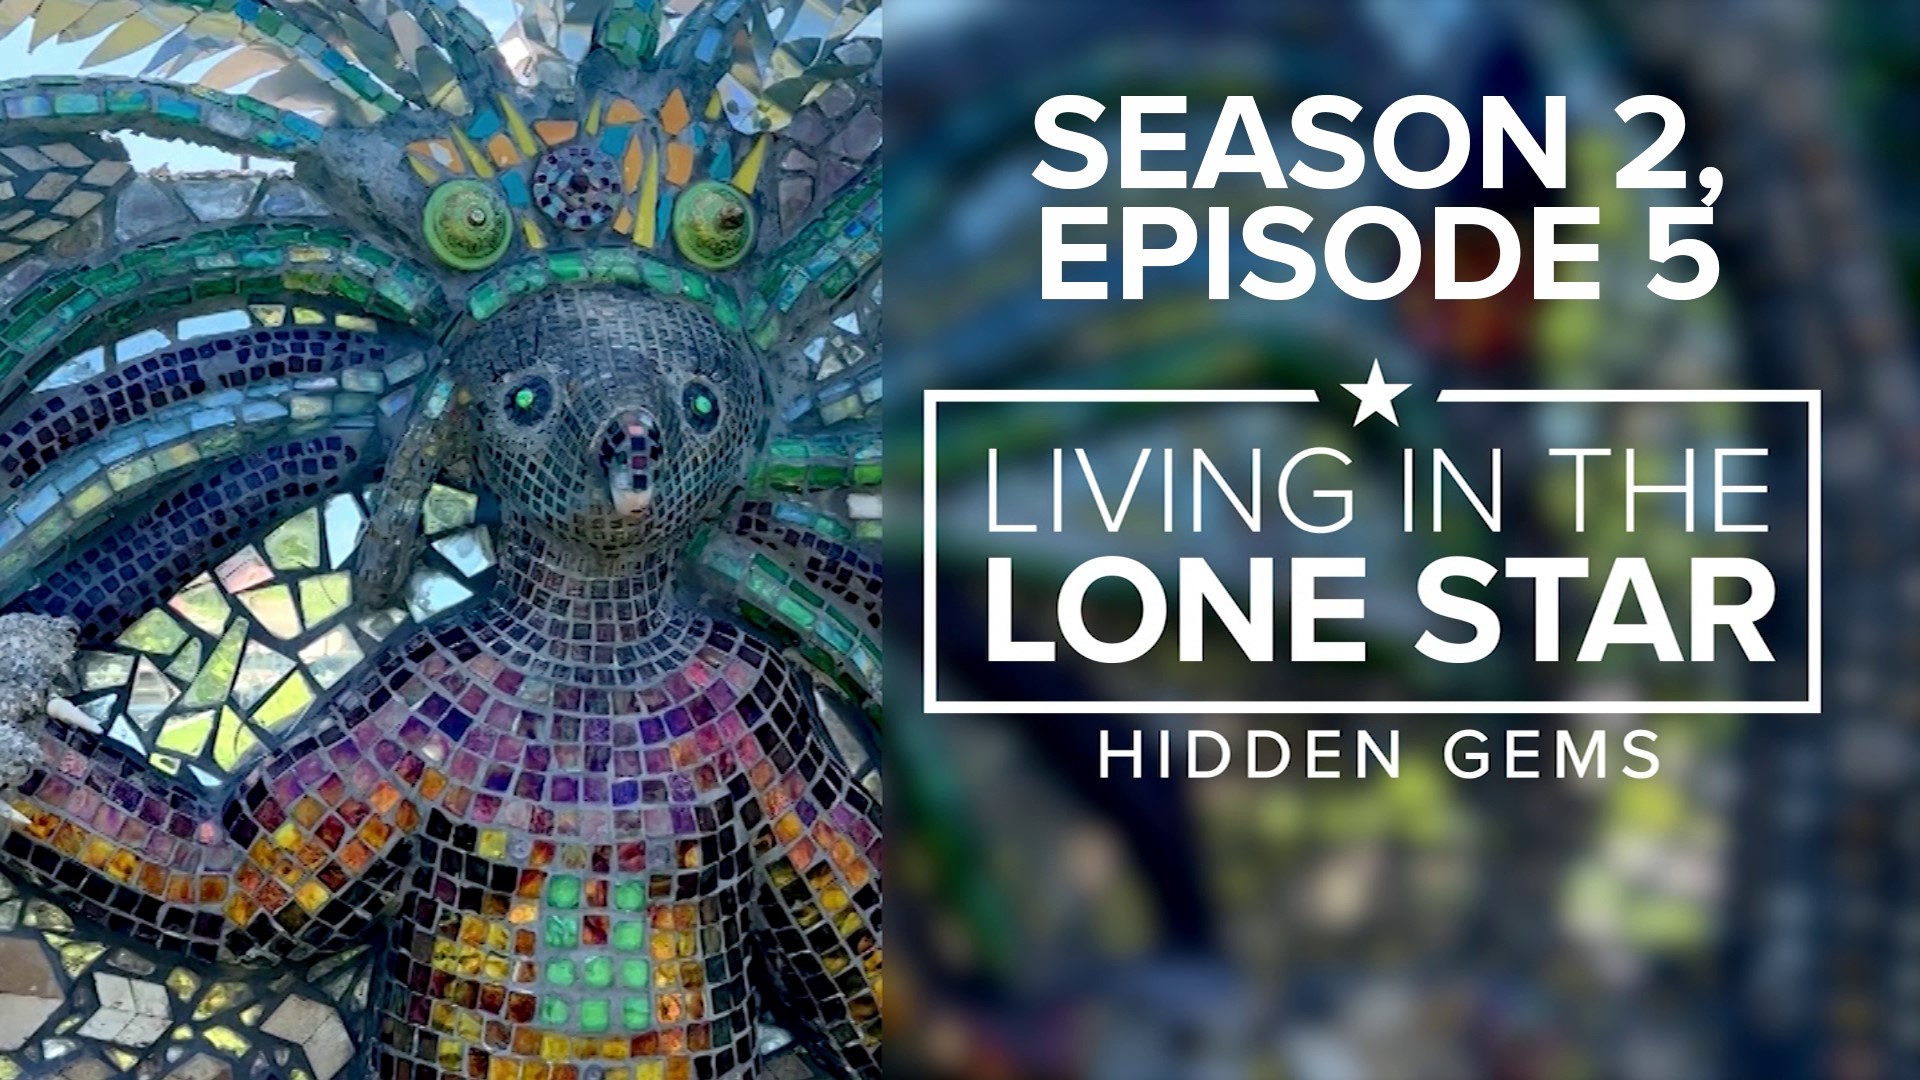 In this episode of Hidden Gems, we'll take you inside just a few of the Houston-area museums where you can travel through time, space, art and more.